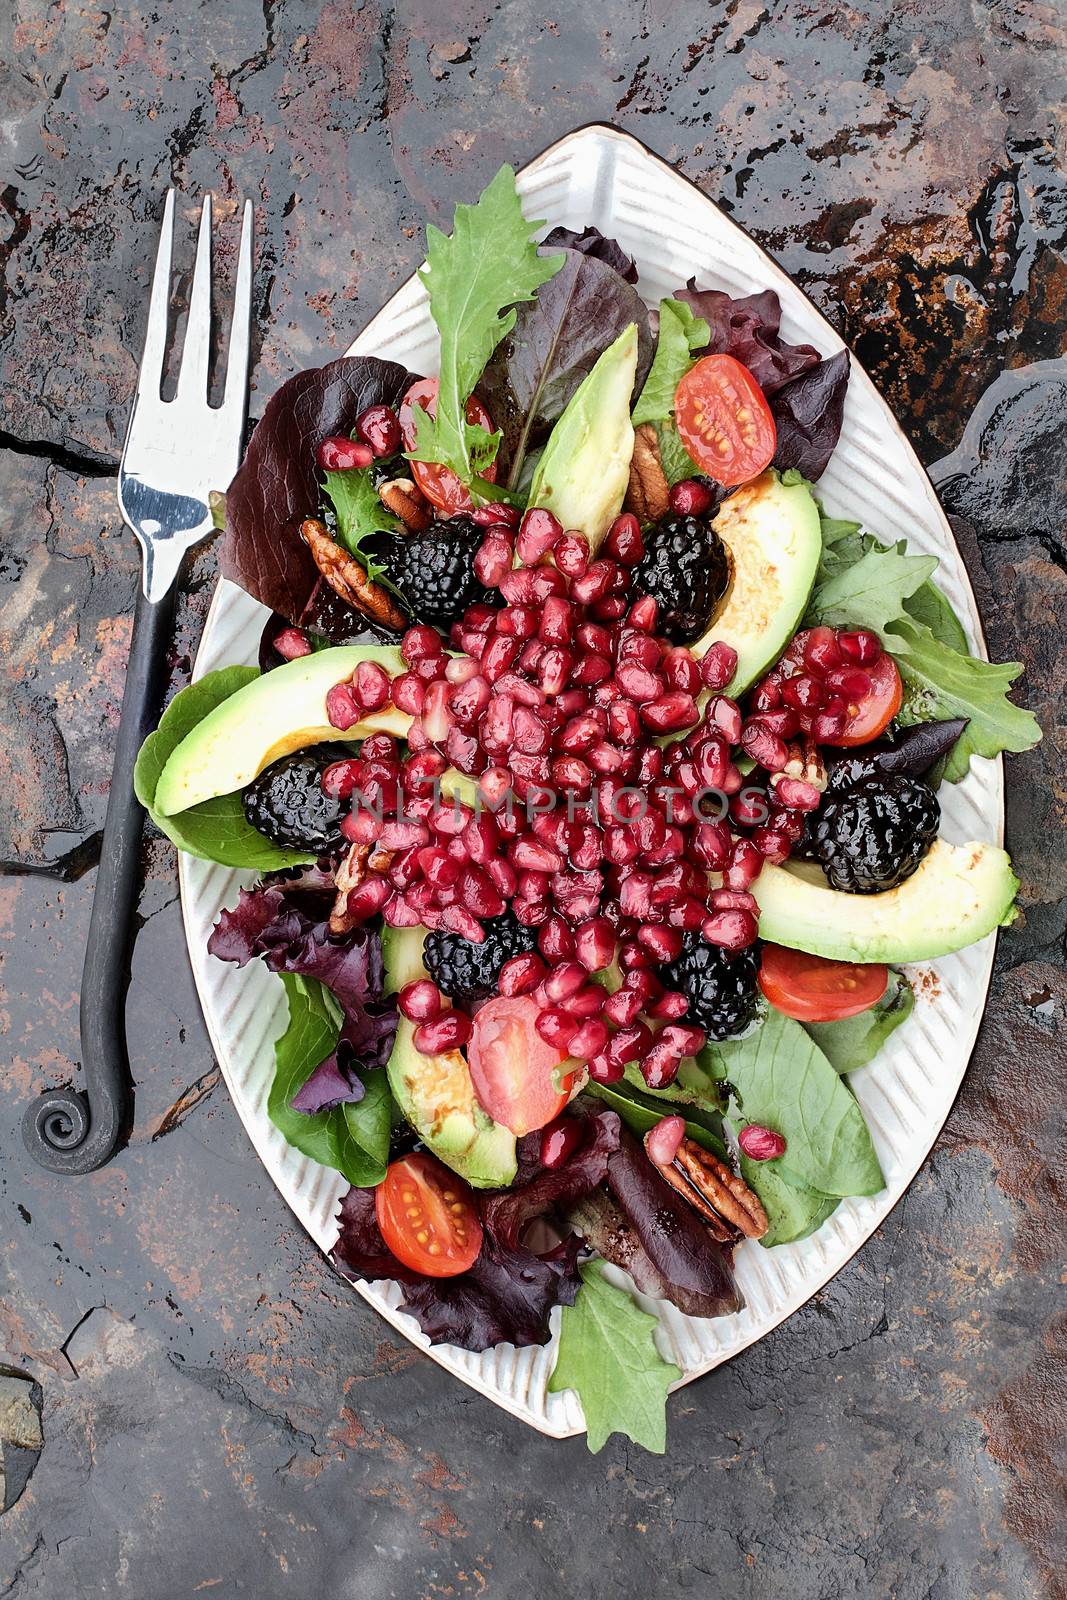 A healthy salad with pomegranate, avocado, tomatoes, almonds and argula lettuce over a rustic background. 